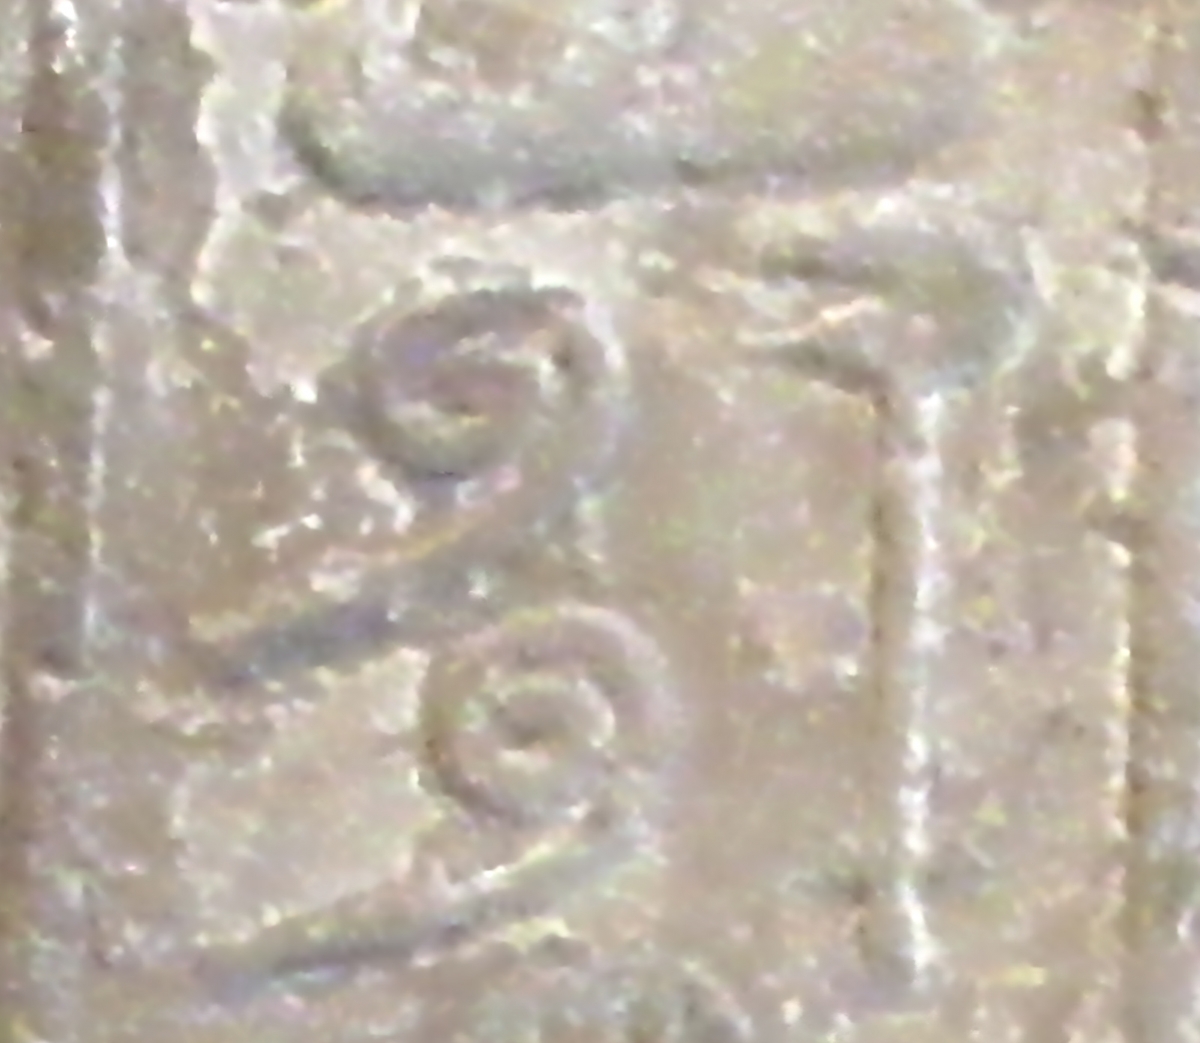 Numeral hieroglyphs found on the Annals of Thutmose III.